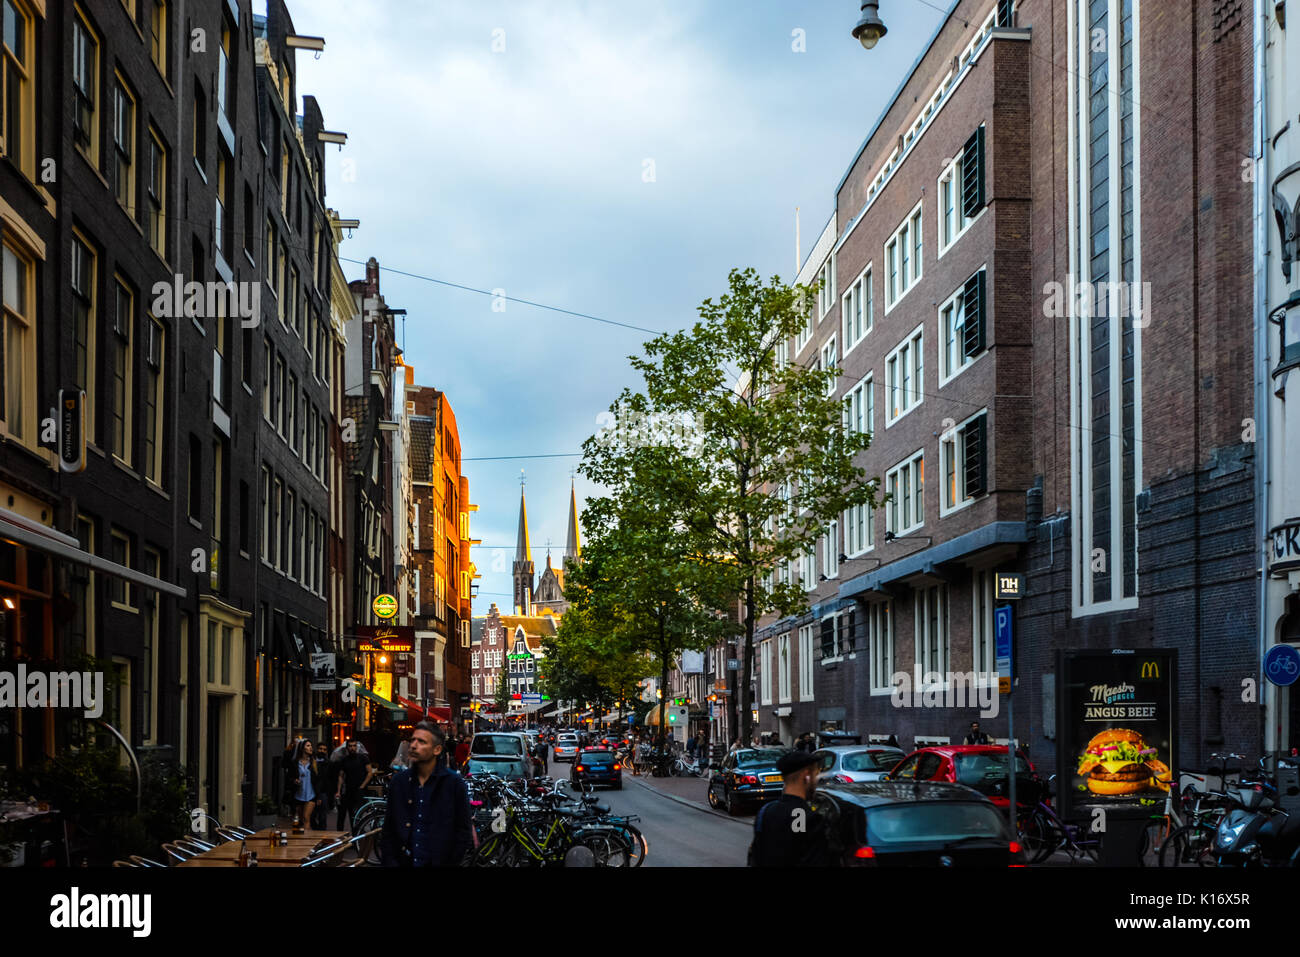 Early evening as the sun goes down in the historic center of Amsterdam with a large church with spires in the background Stock Photo